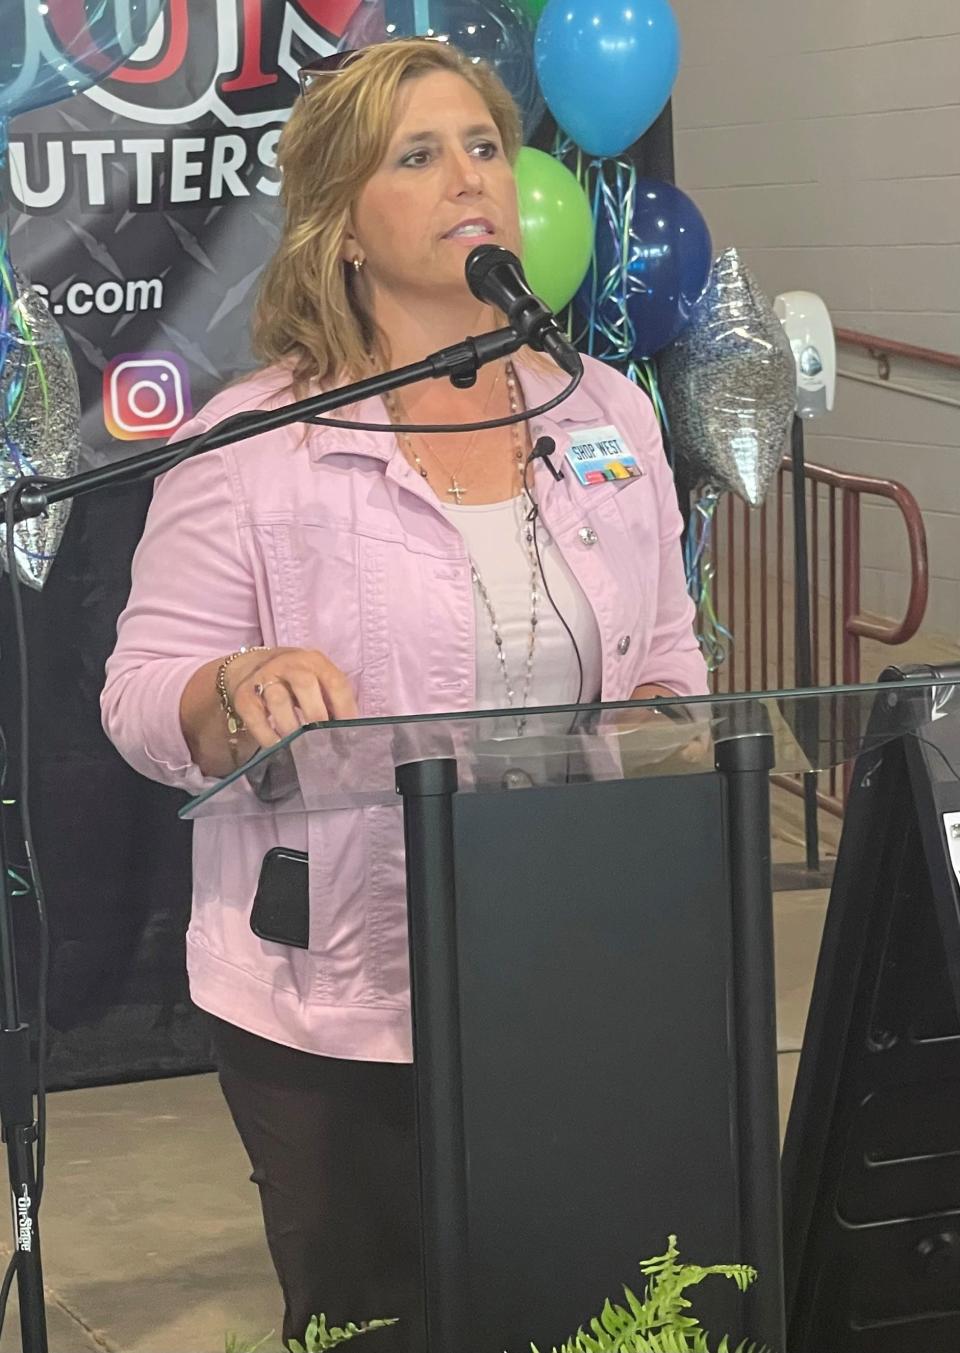 West Monroe Mayor Staci Mitchell announced details for the West Monroe Birthday Bash during a press conference Wednesday at the Ike Hamilton Expo.